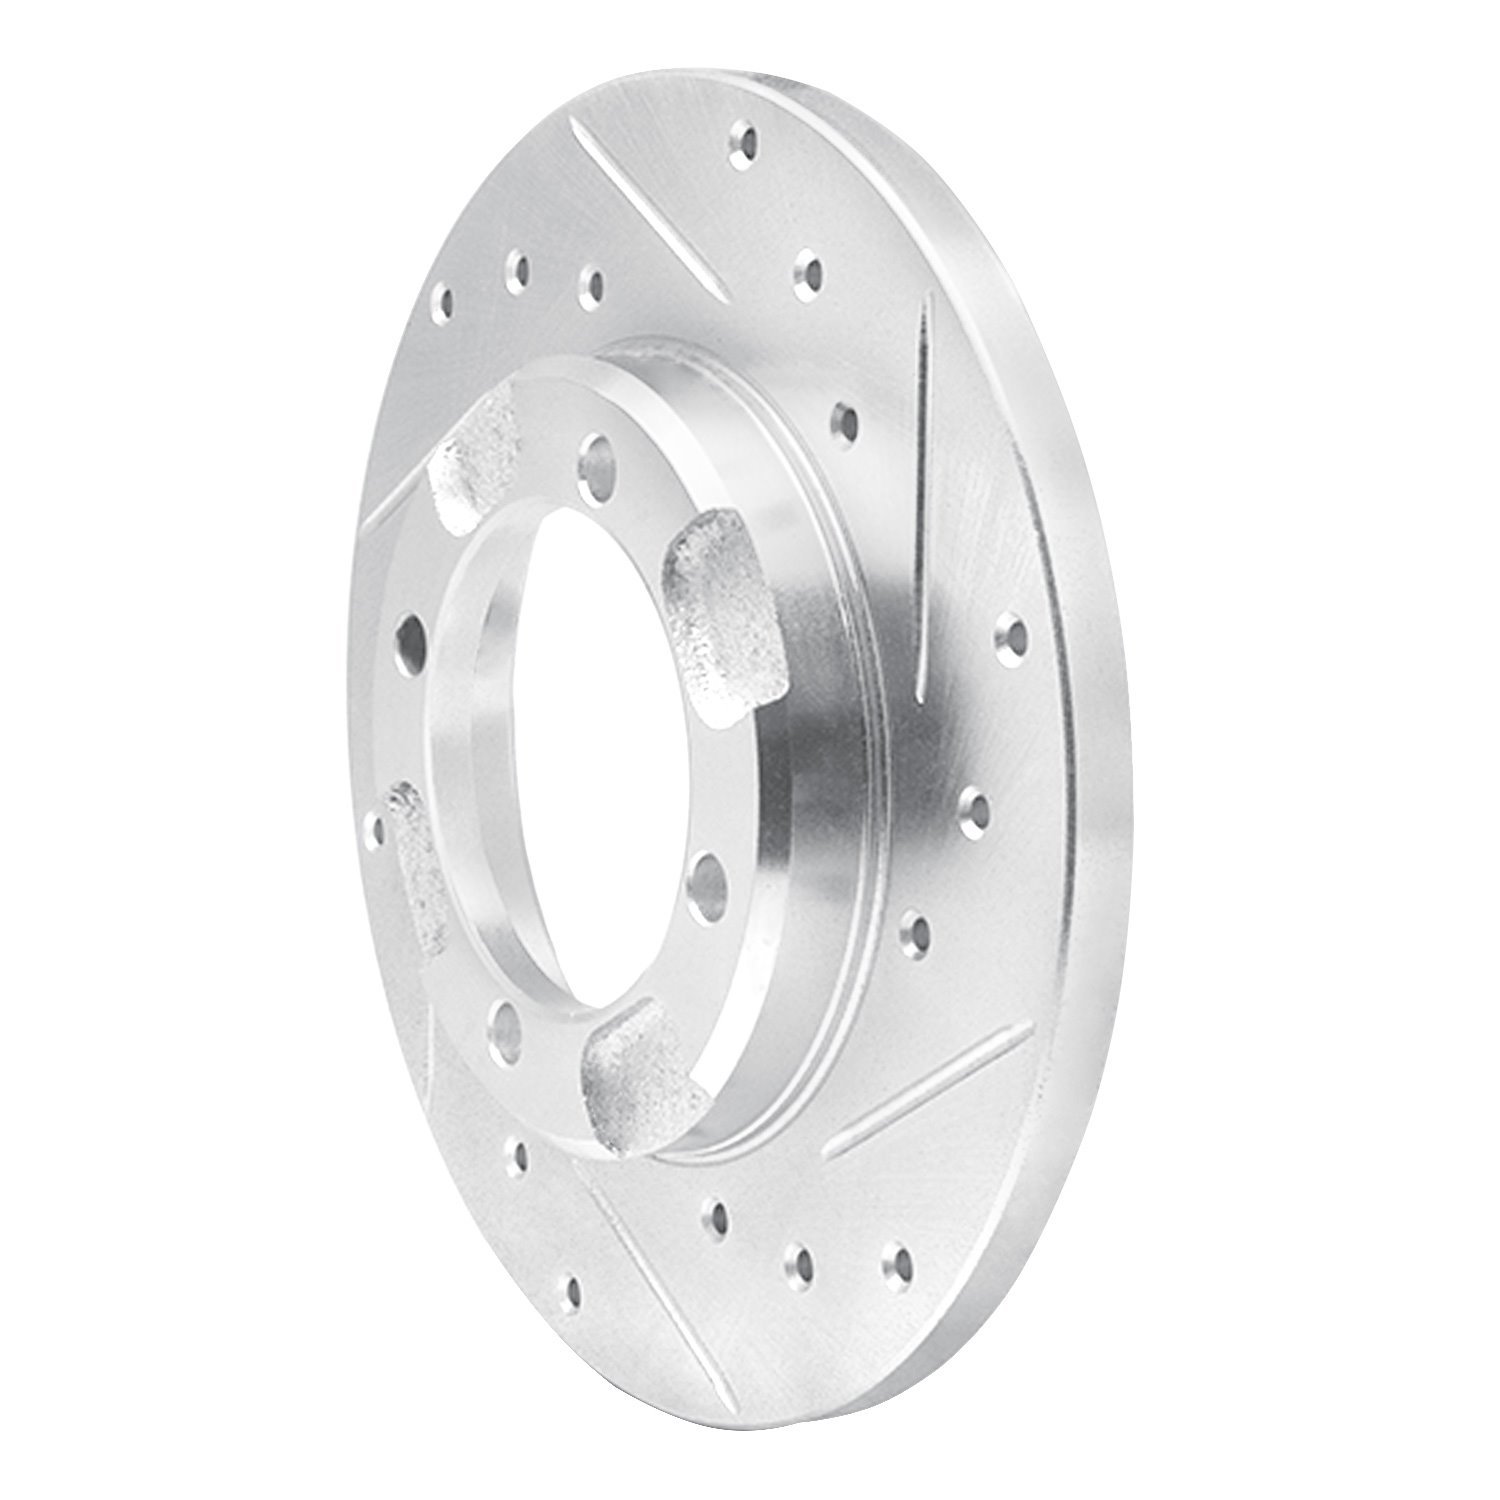 E-Line Drilled & Slotted Silver Brake Rotor, 1991-1992 Fits Multiple Makes/Models, Position: Front Right